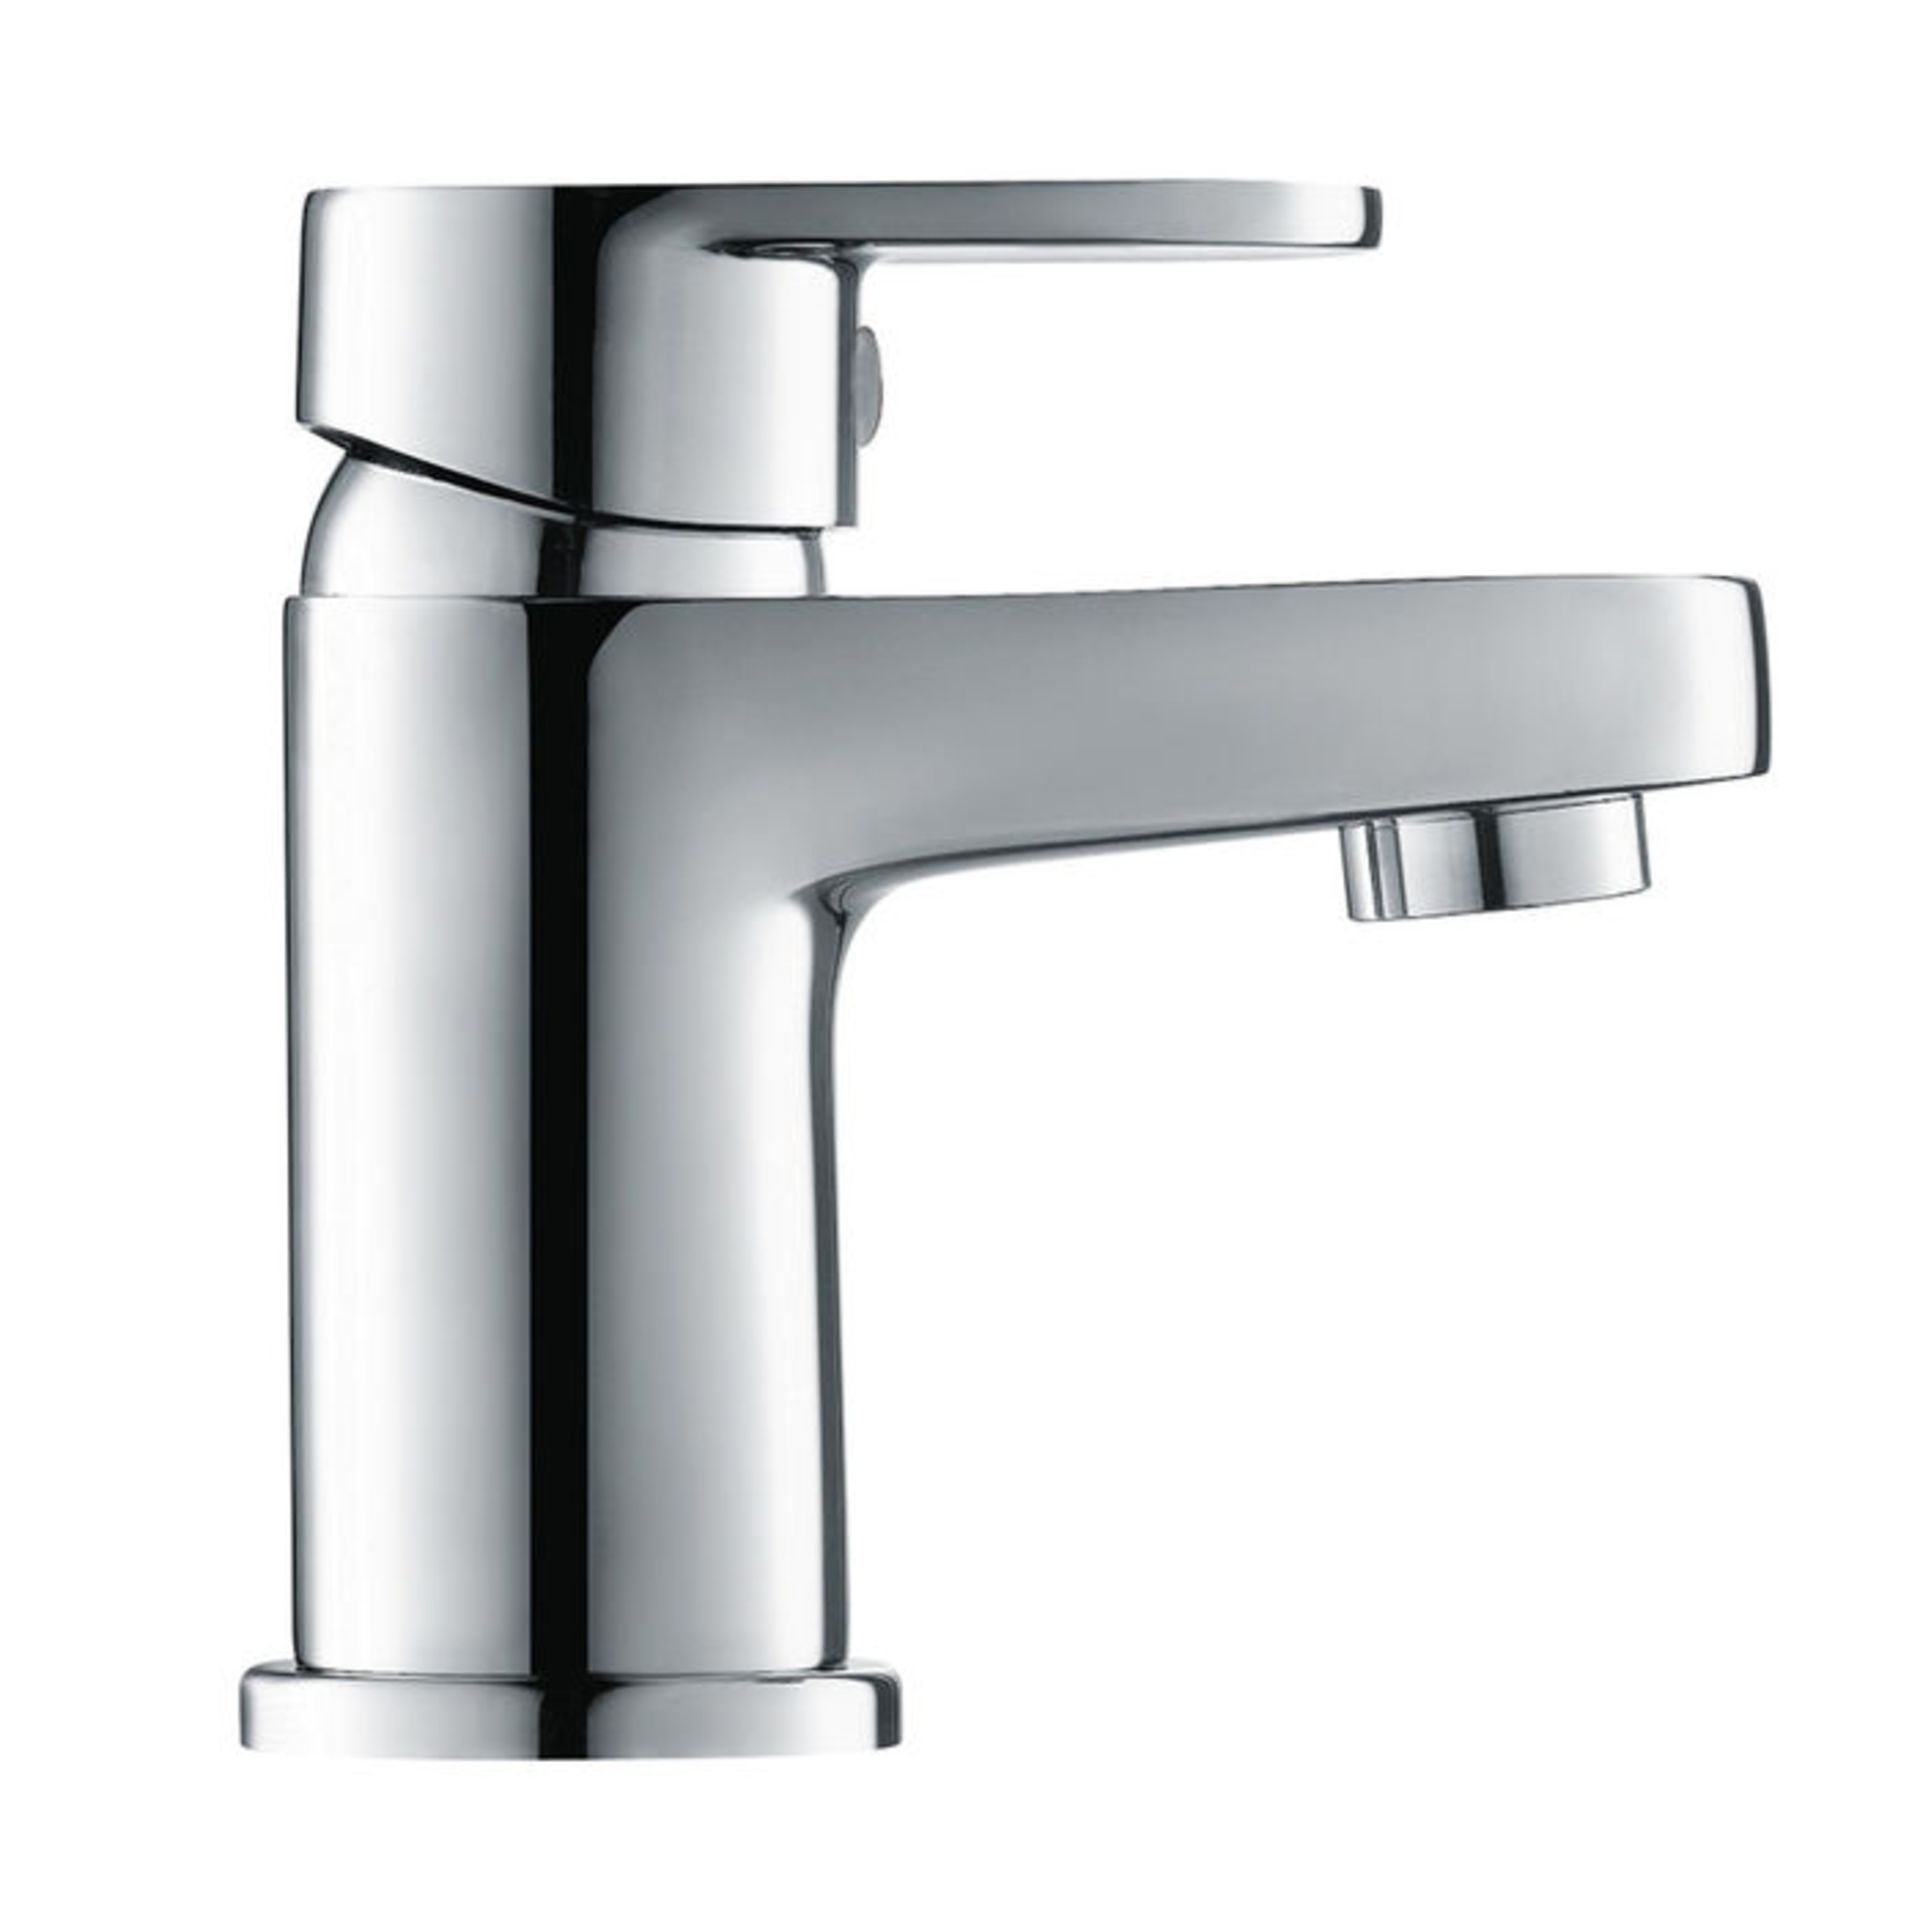 (M1056) Boll Mono Sink Mixer Tap - Cloakroom Chrome Plated Solid Brass Mixer cartridge Minim... - Image 3 of 3